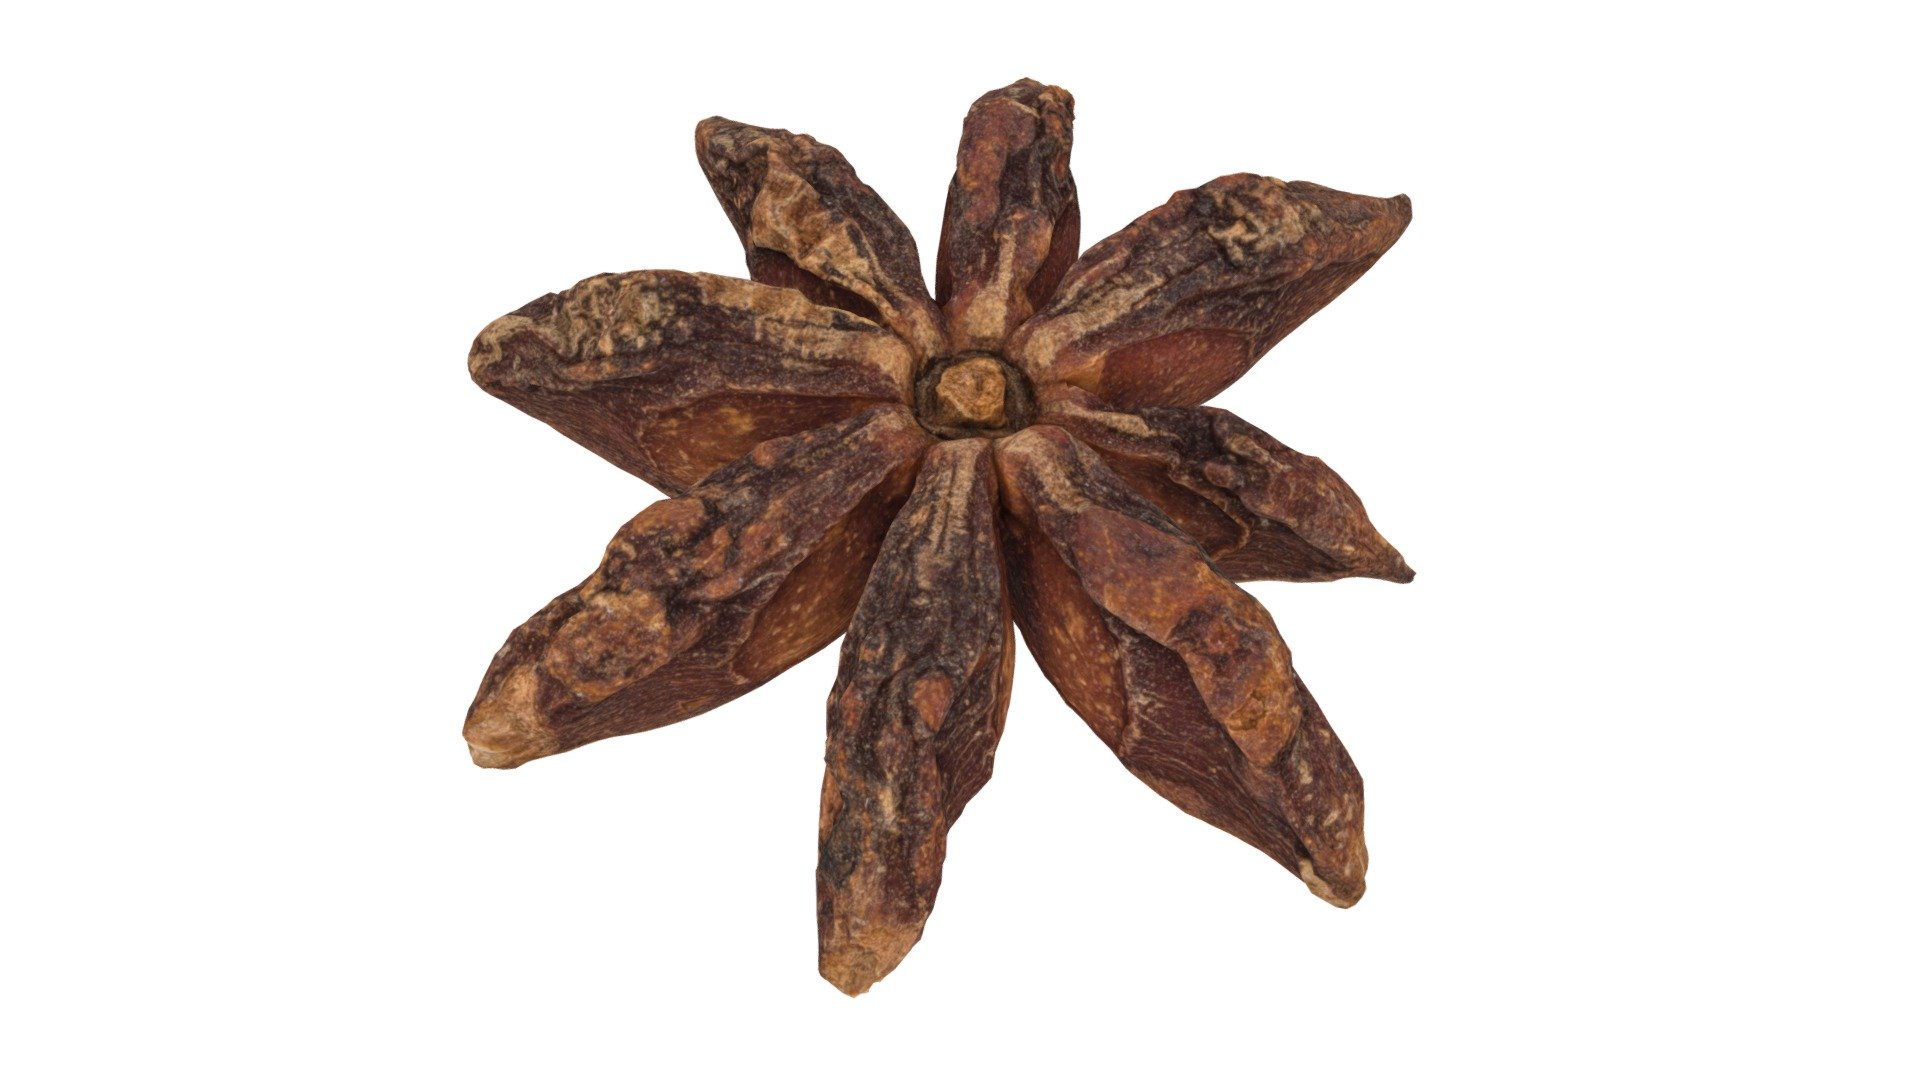 Highly detailed, photorealistic, 3d scanned model of a starAnise. 8k textures maps, optimized topology and uv unwrapped.

Model shown here is lowpoly with diffuse map only and 4k texture size.

This model is available at www.thecreativecrops.com 3d model